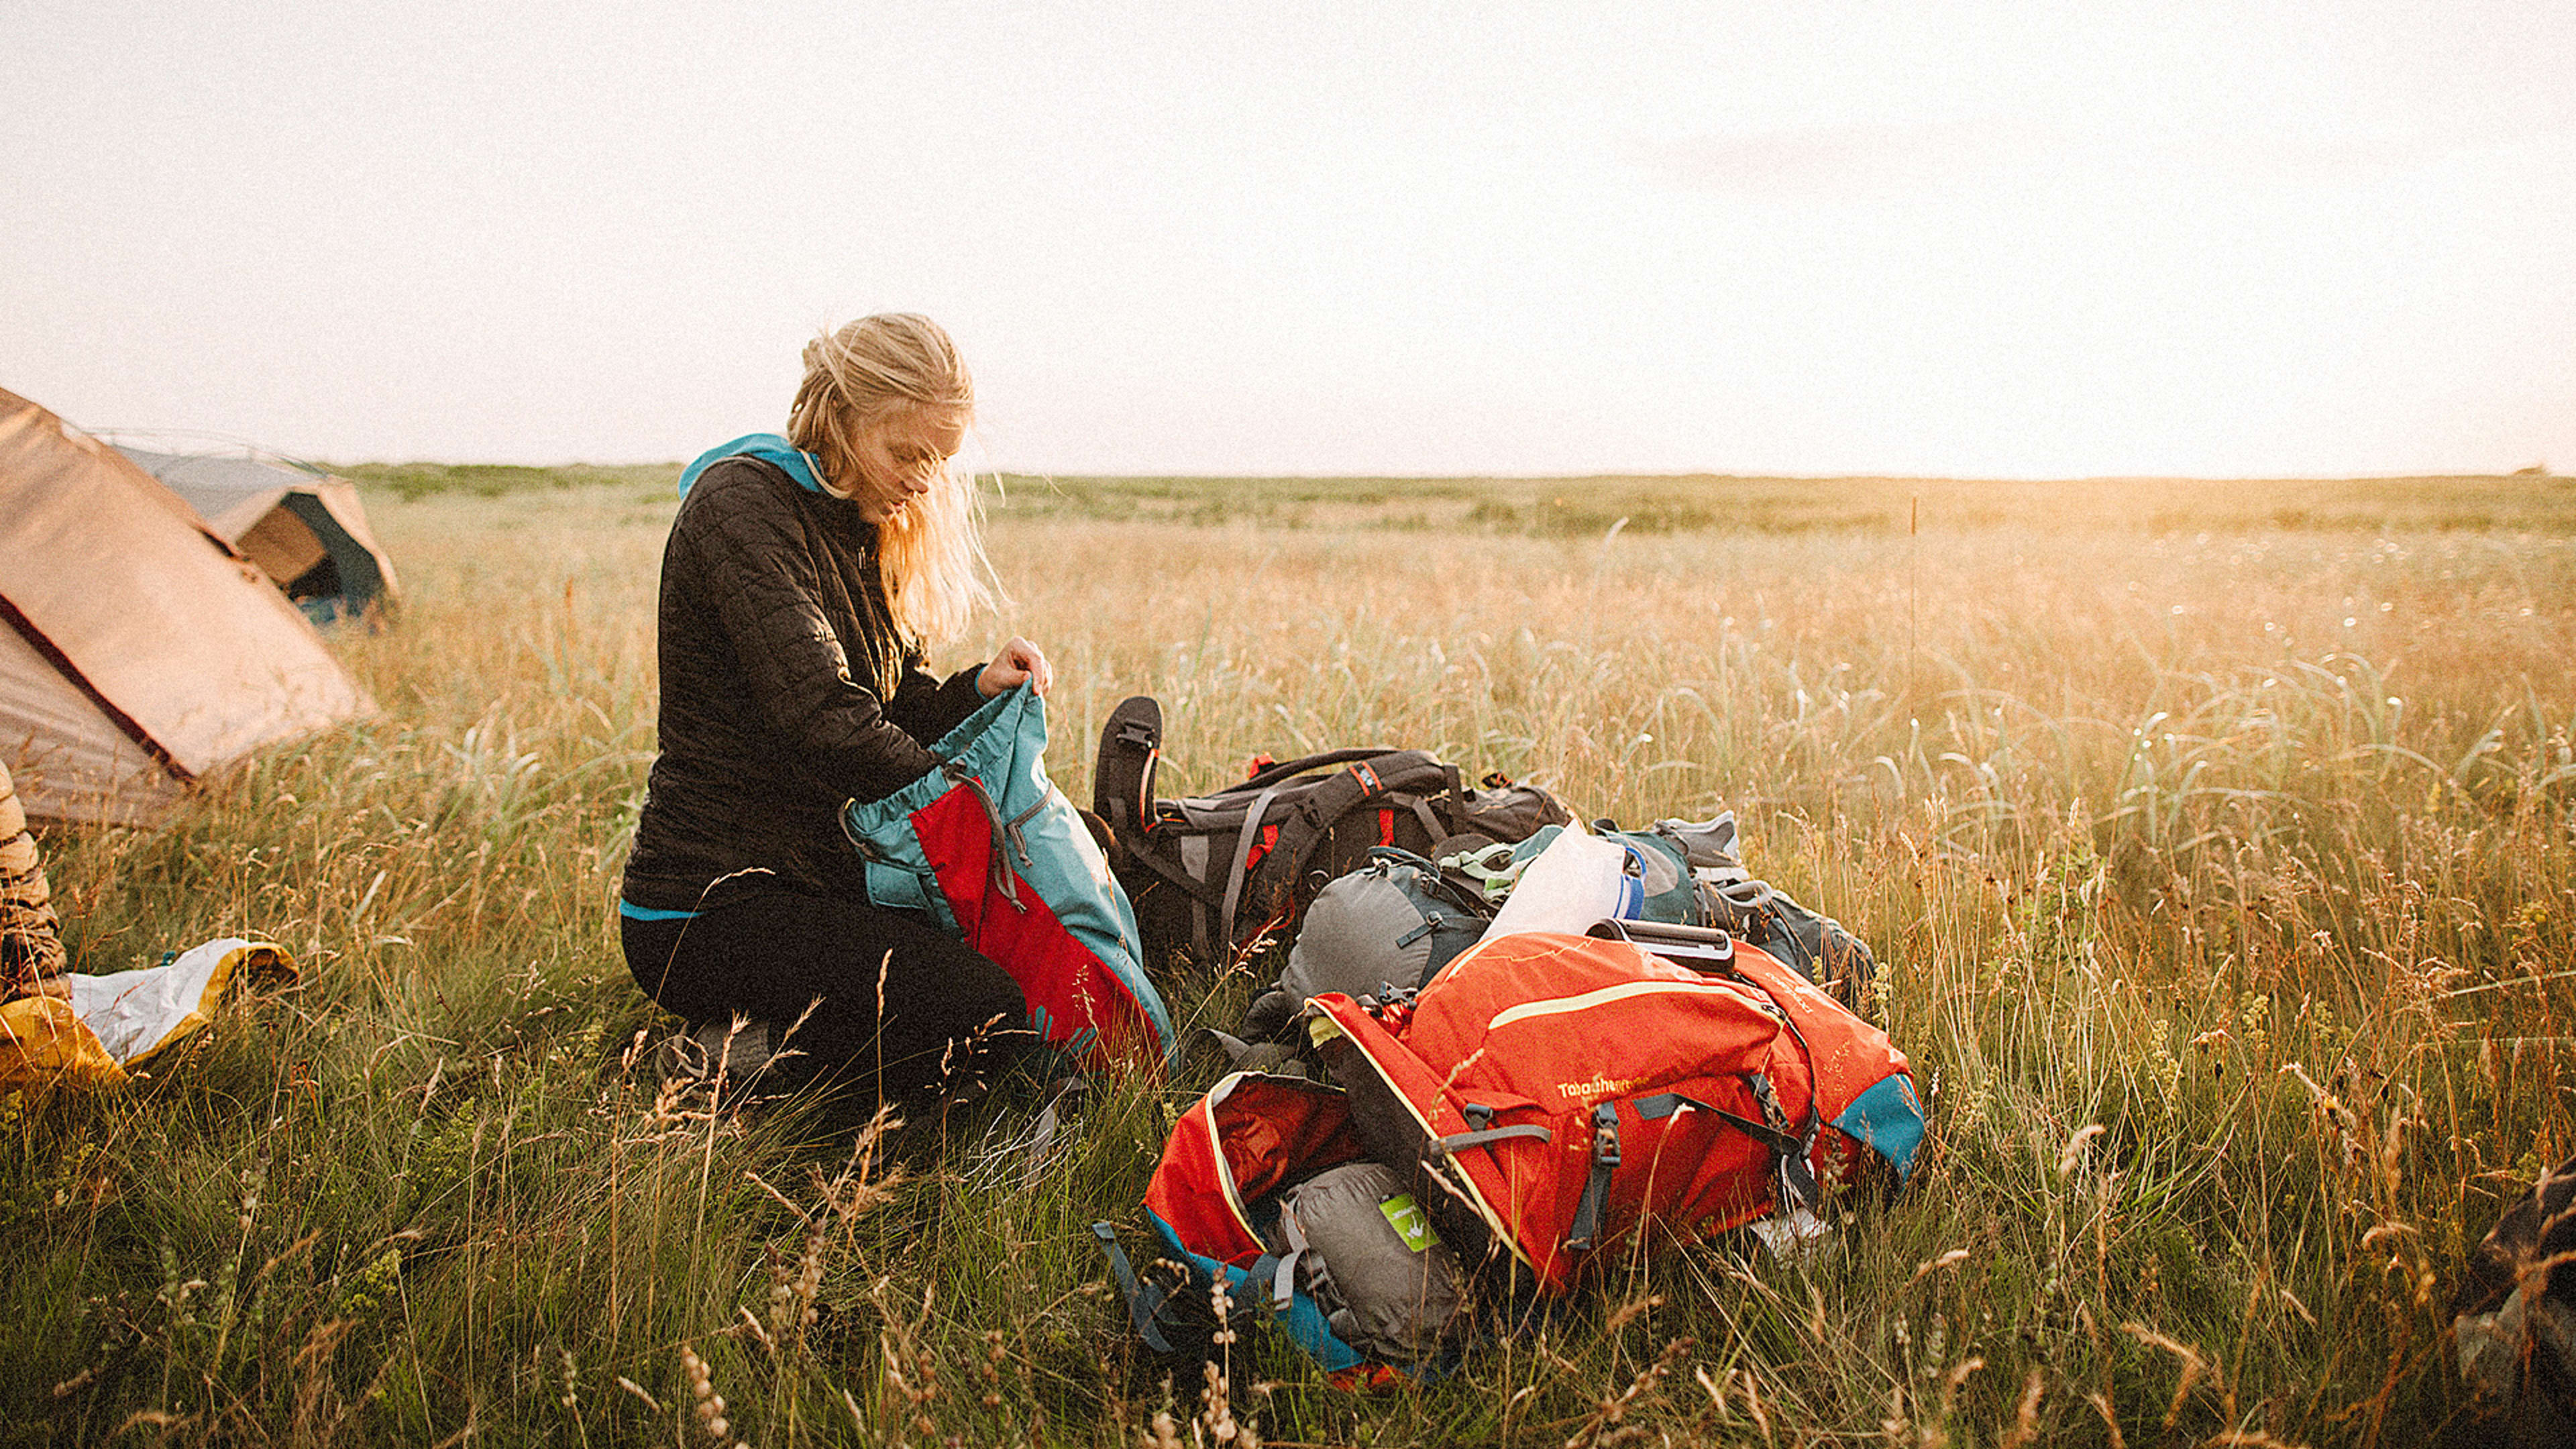 This Outdoor-Gear-For-Good Company Proves You Can Be A Benefit Corporation From Day One